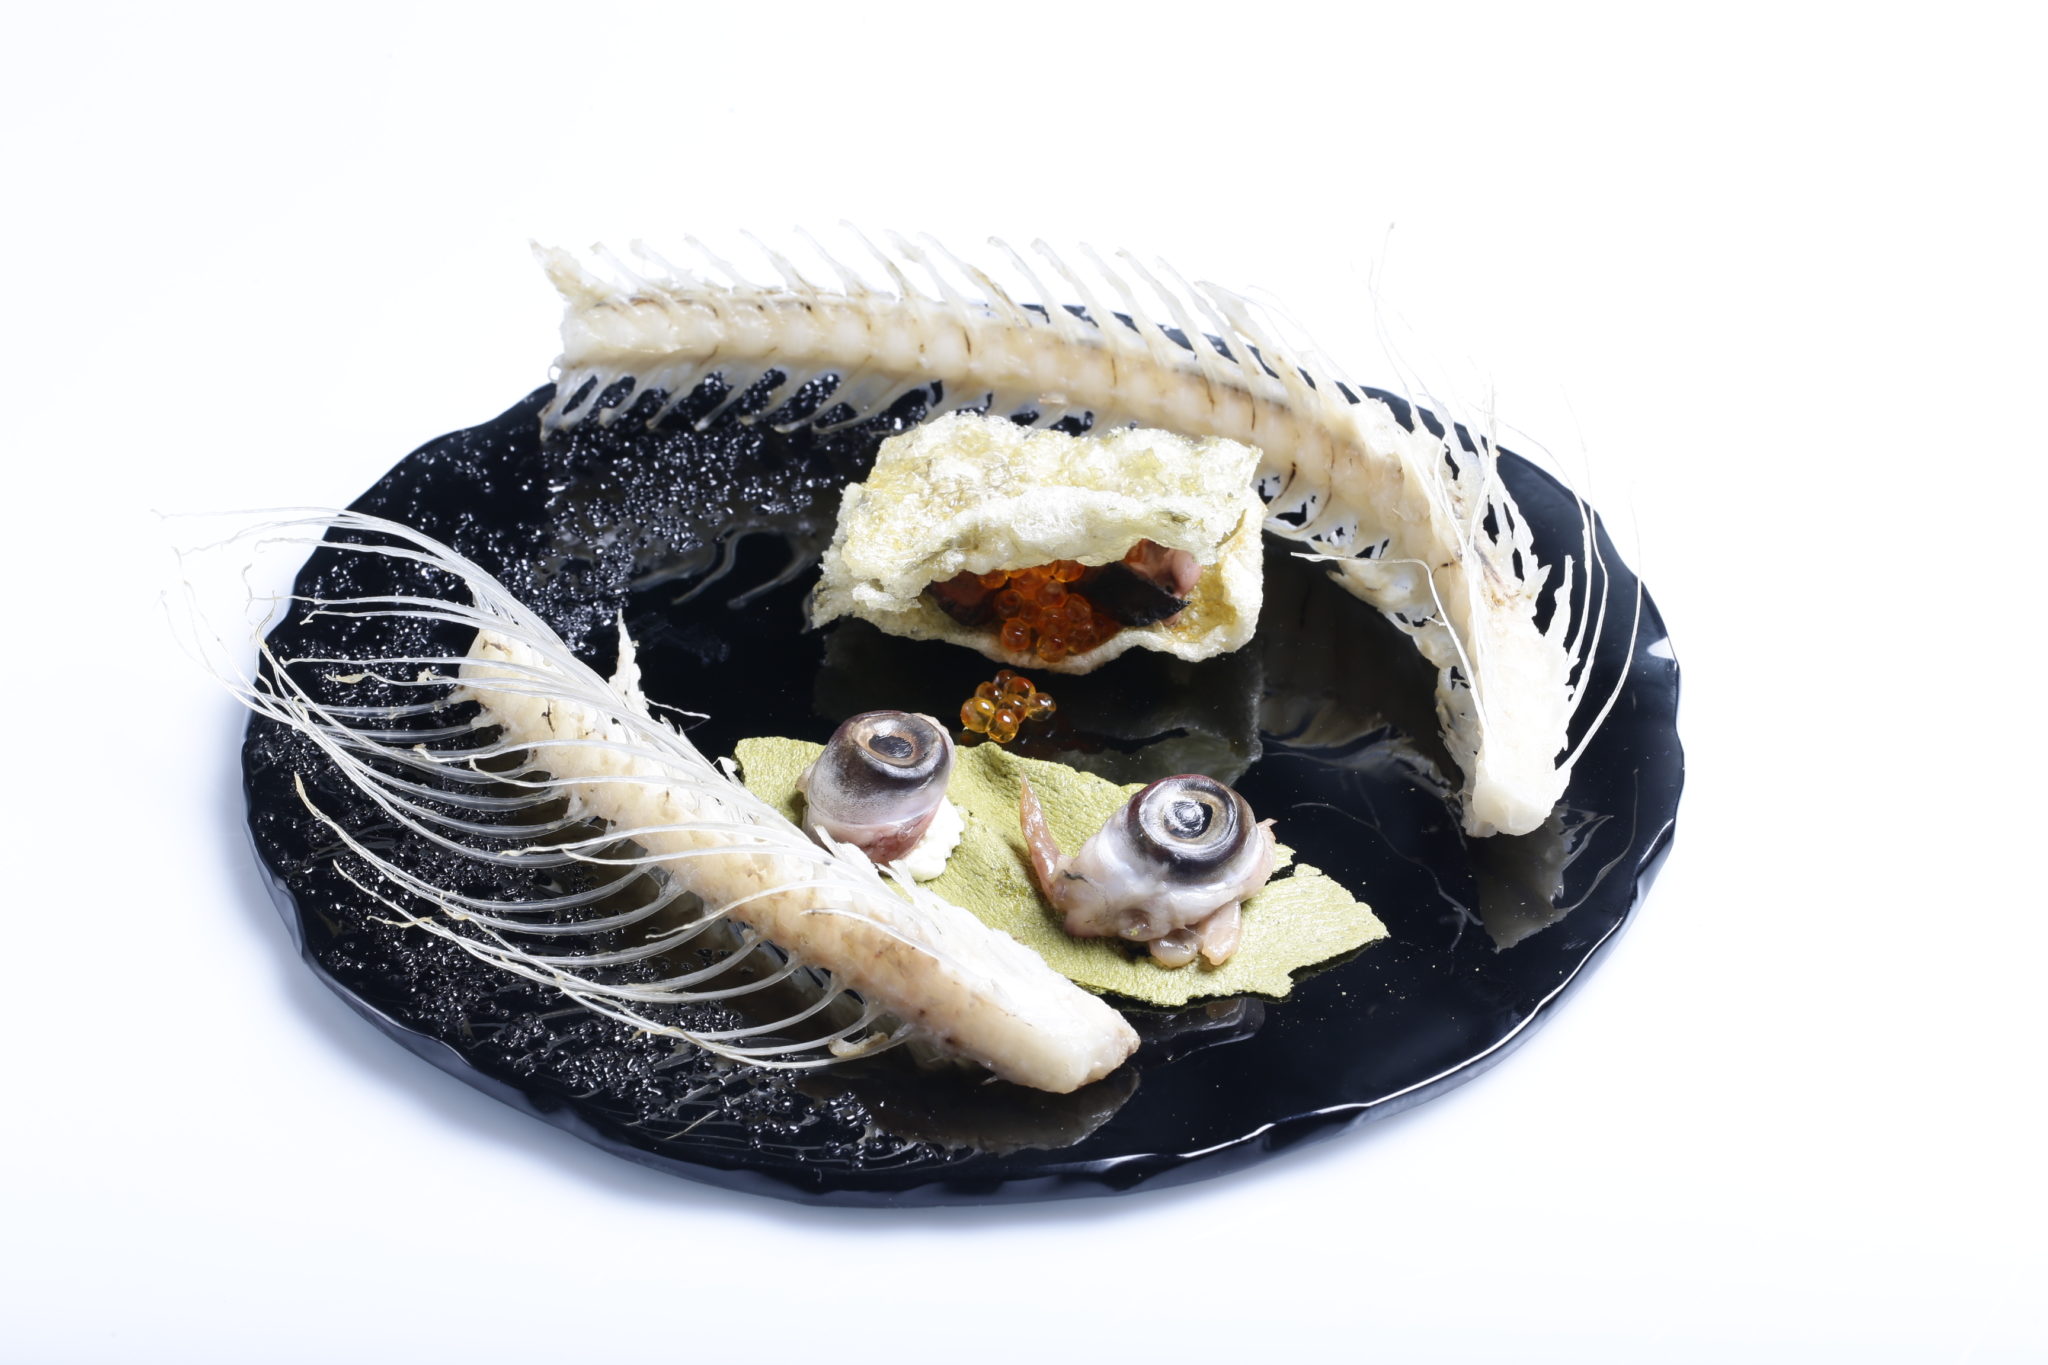 One of nine dishes created by Ana Ros using a single trout